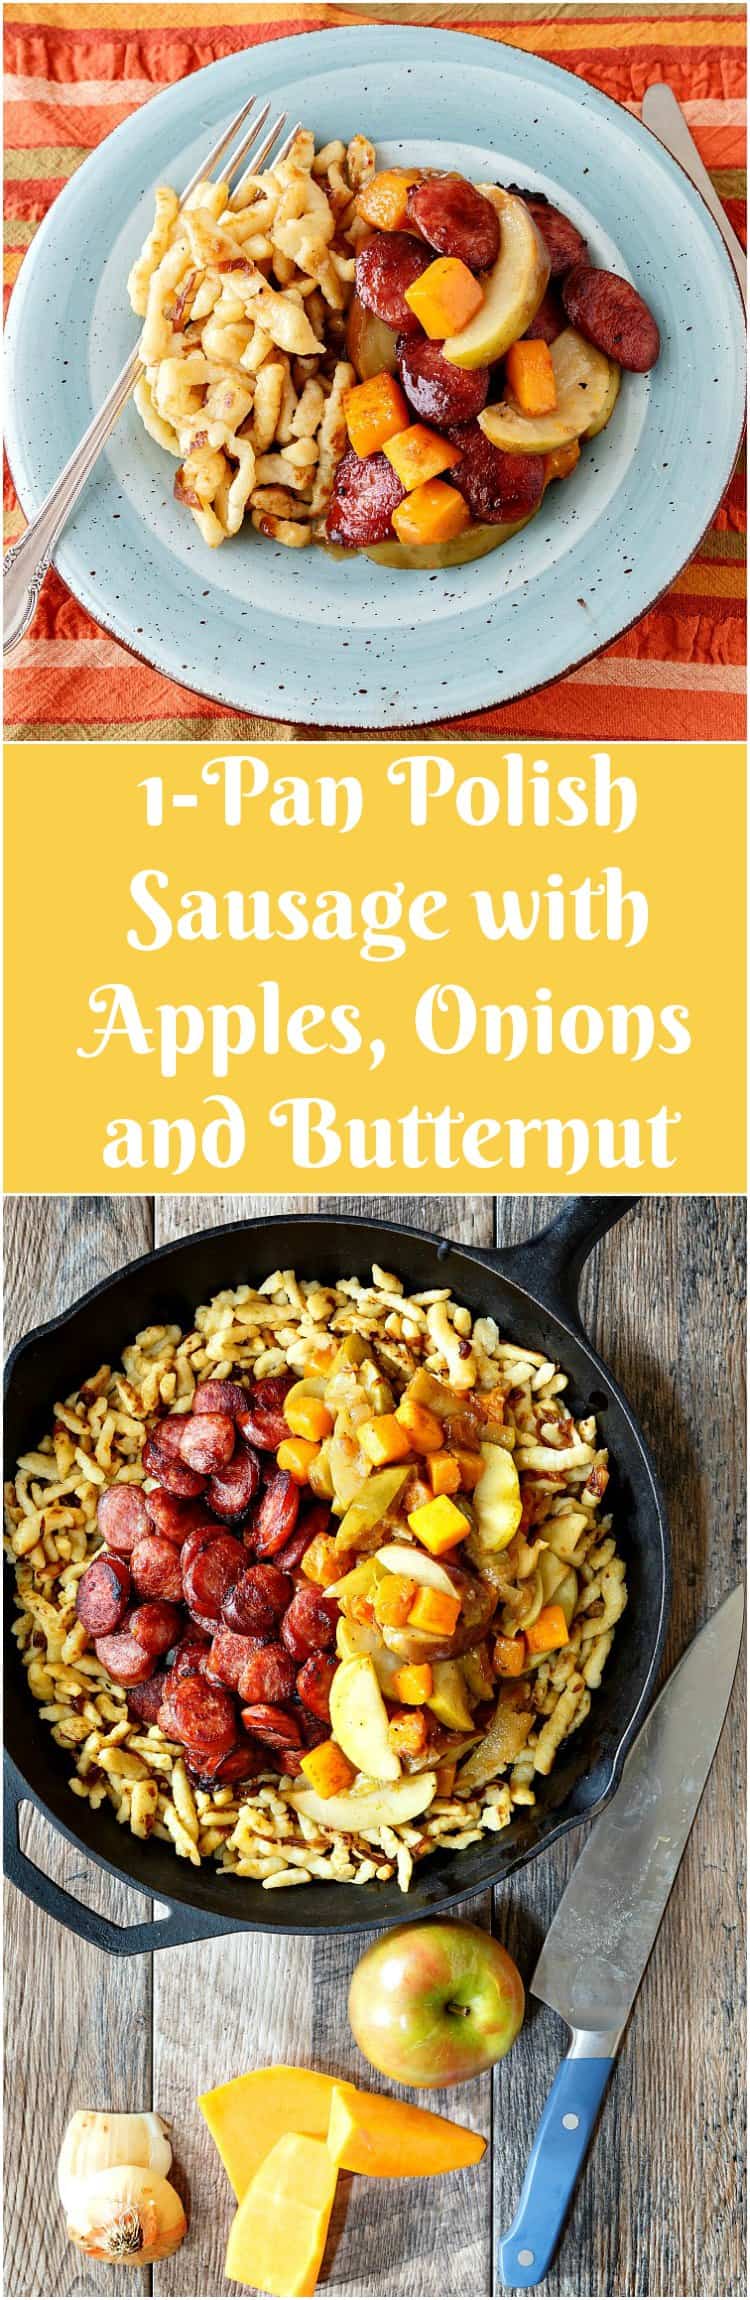 2 pictures of 1-pan polish sausage with text between them saying: "Apples, onions, and butternut Squash".